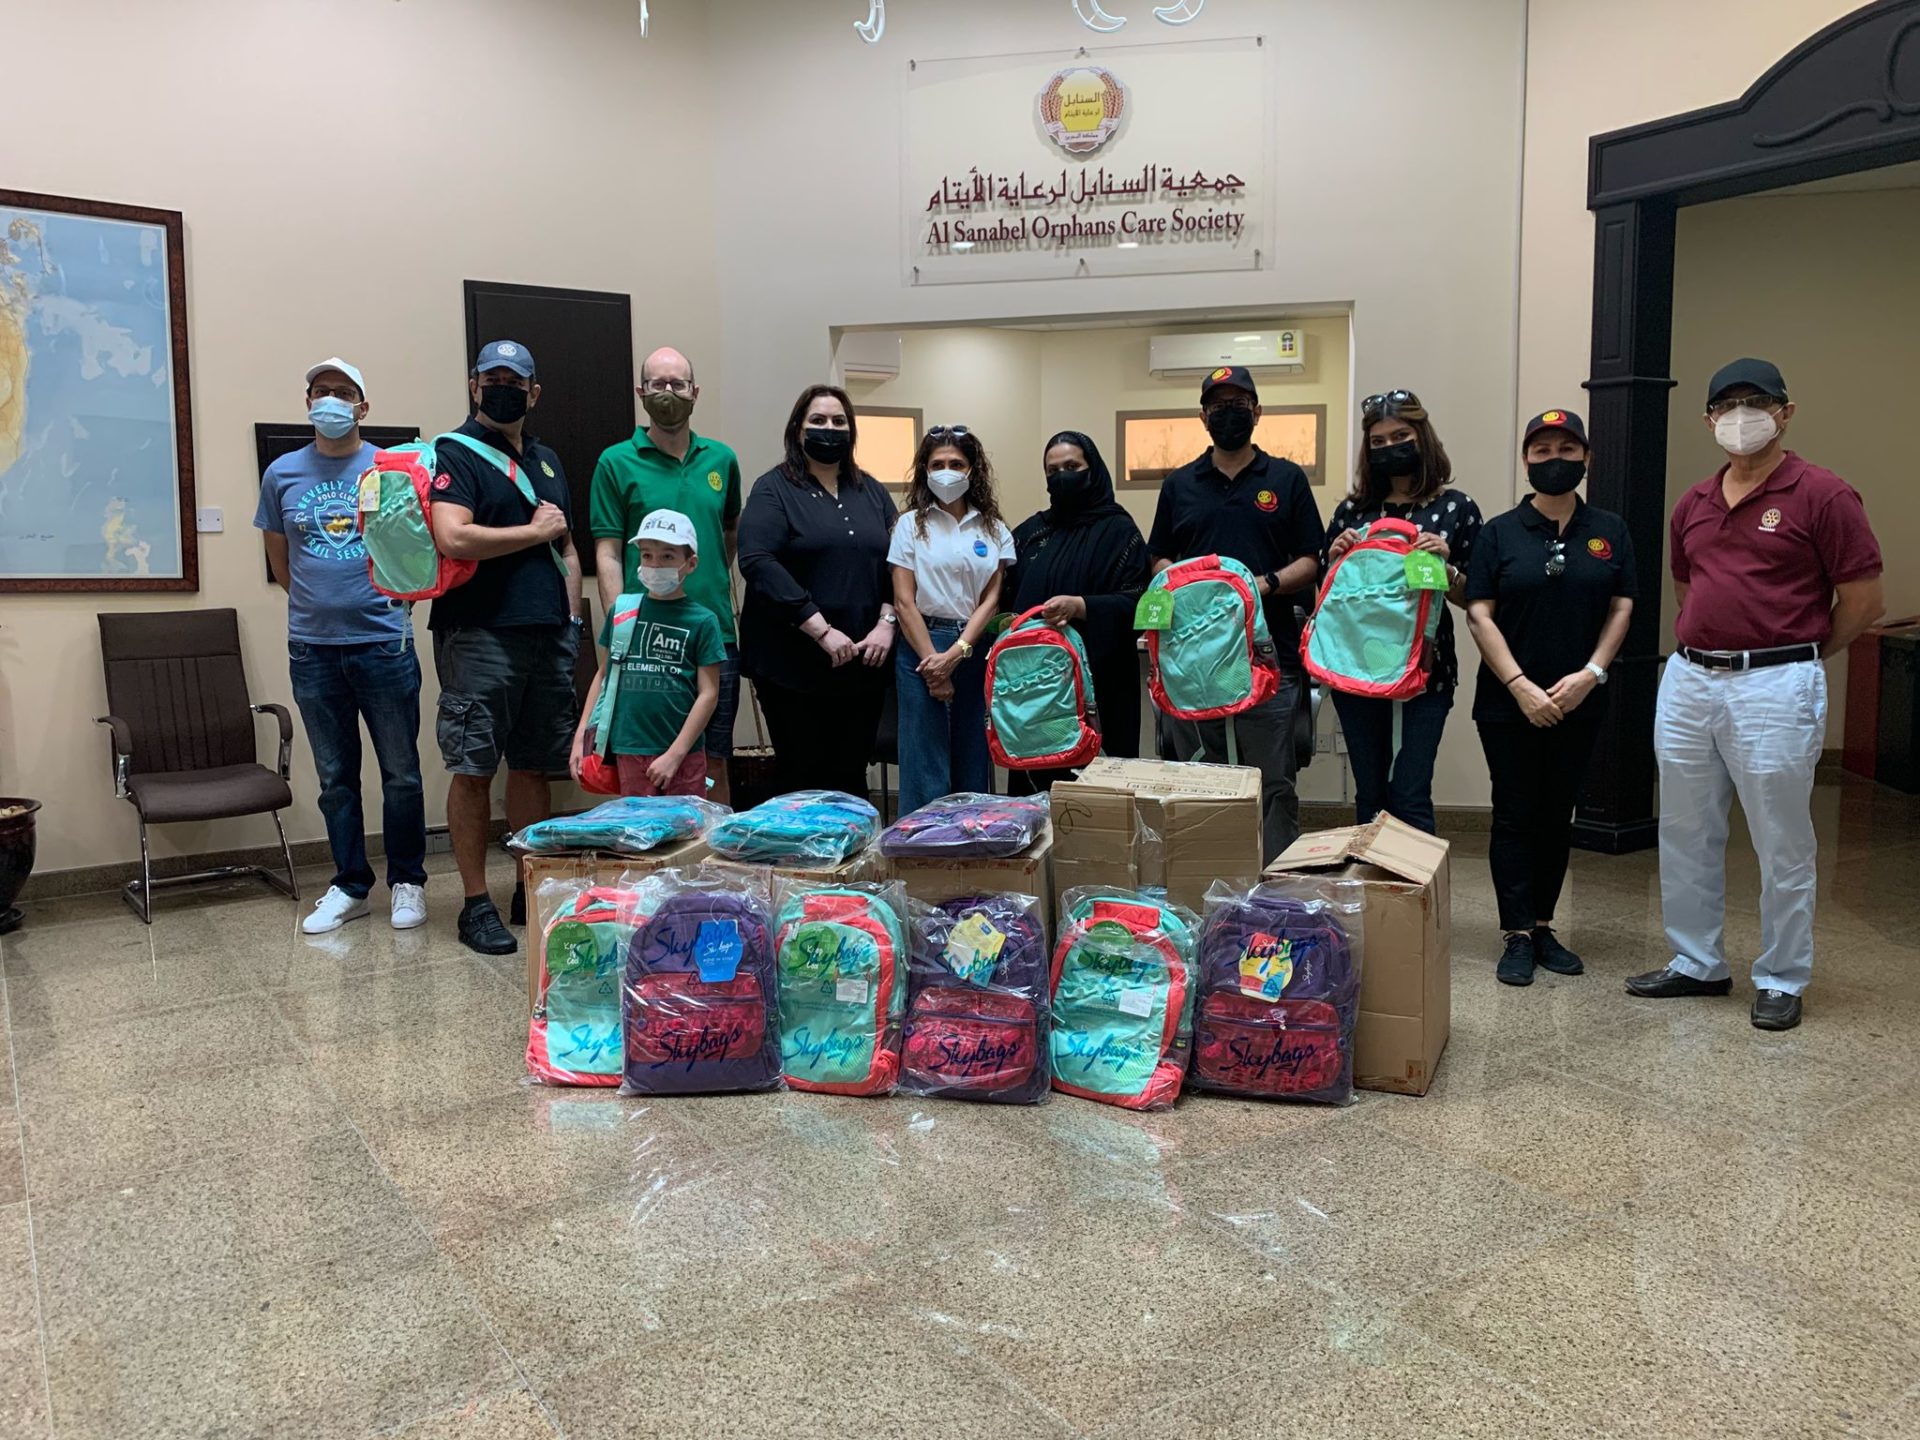 Rotary Club's of Bahrain distribute school bags to charity societies